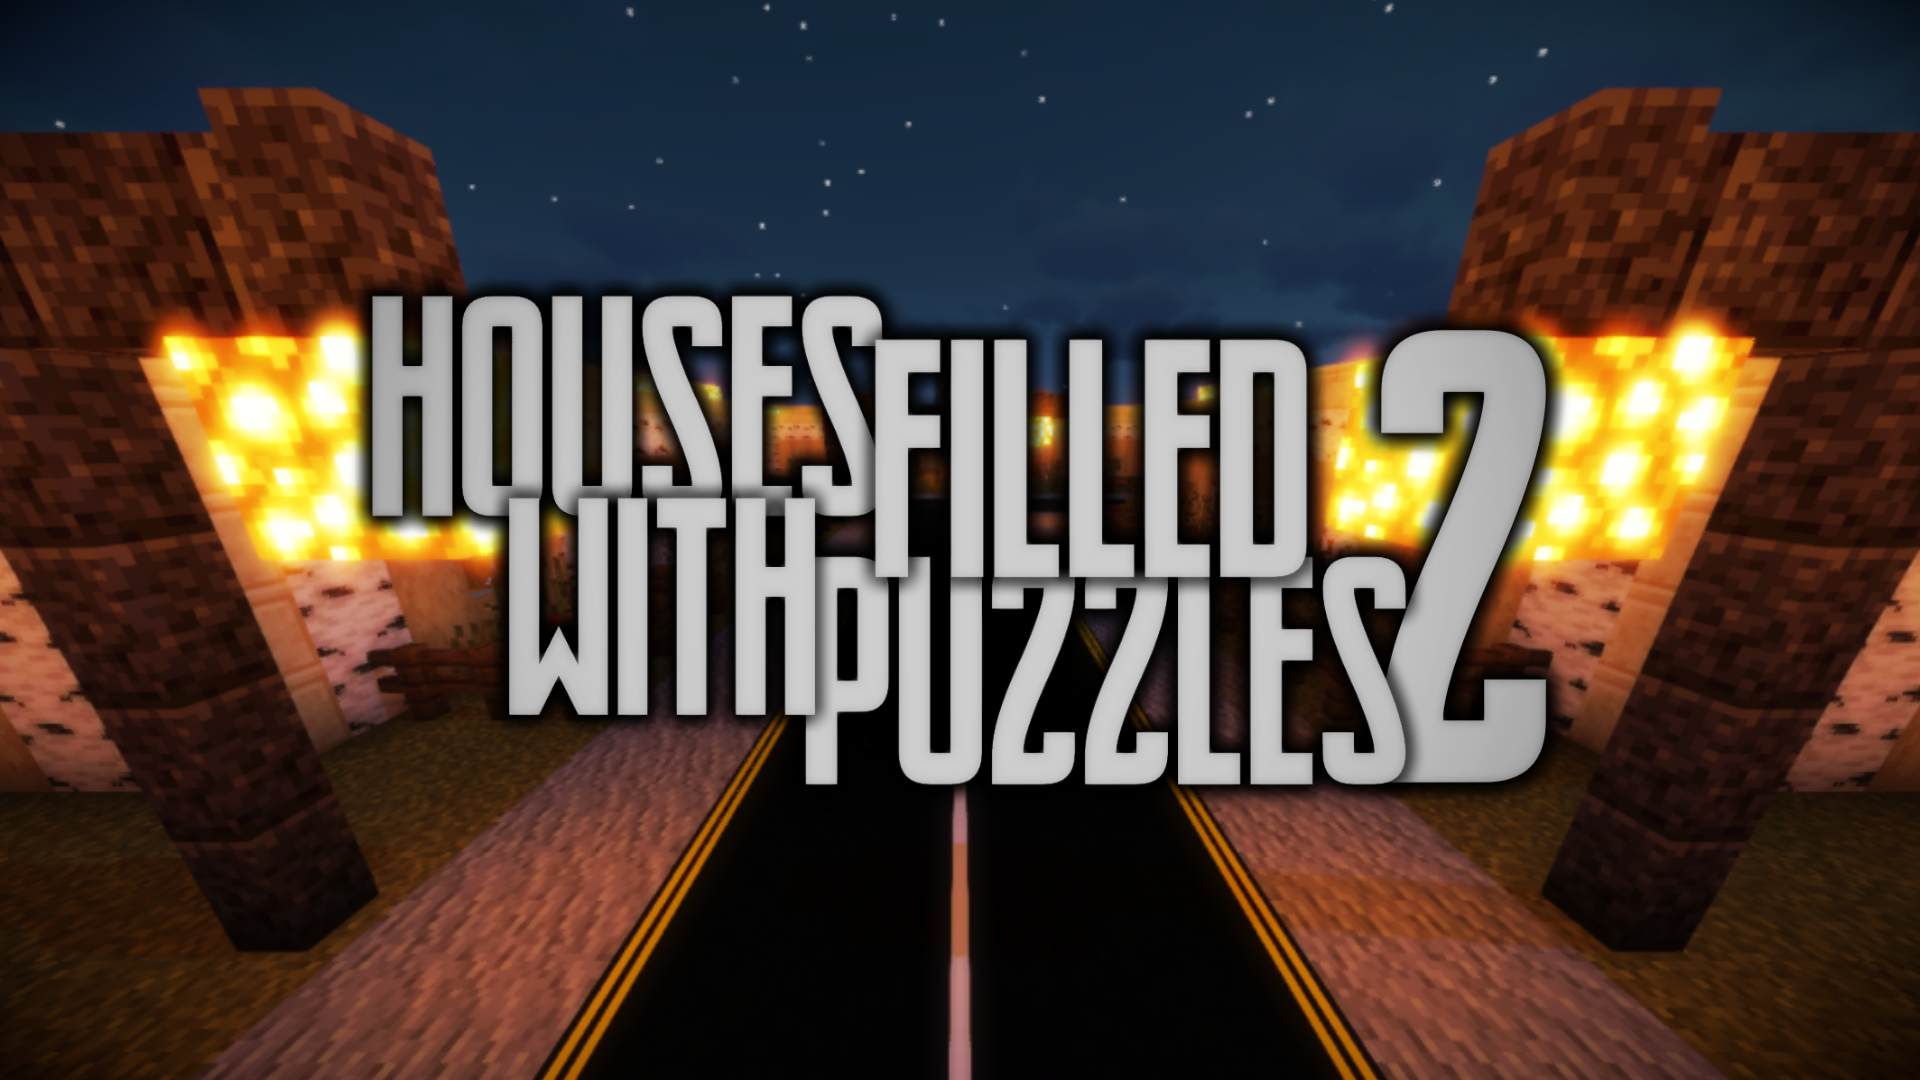 Descargar Houses Filled With Puzzles 2 para Minecraft 1.16.4